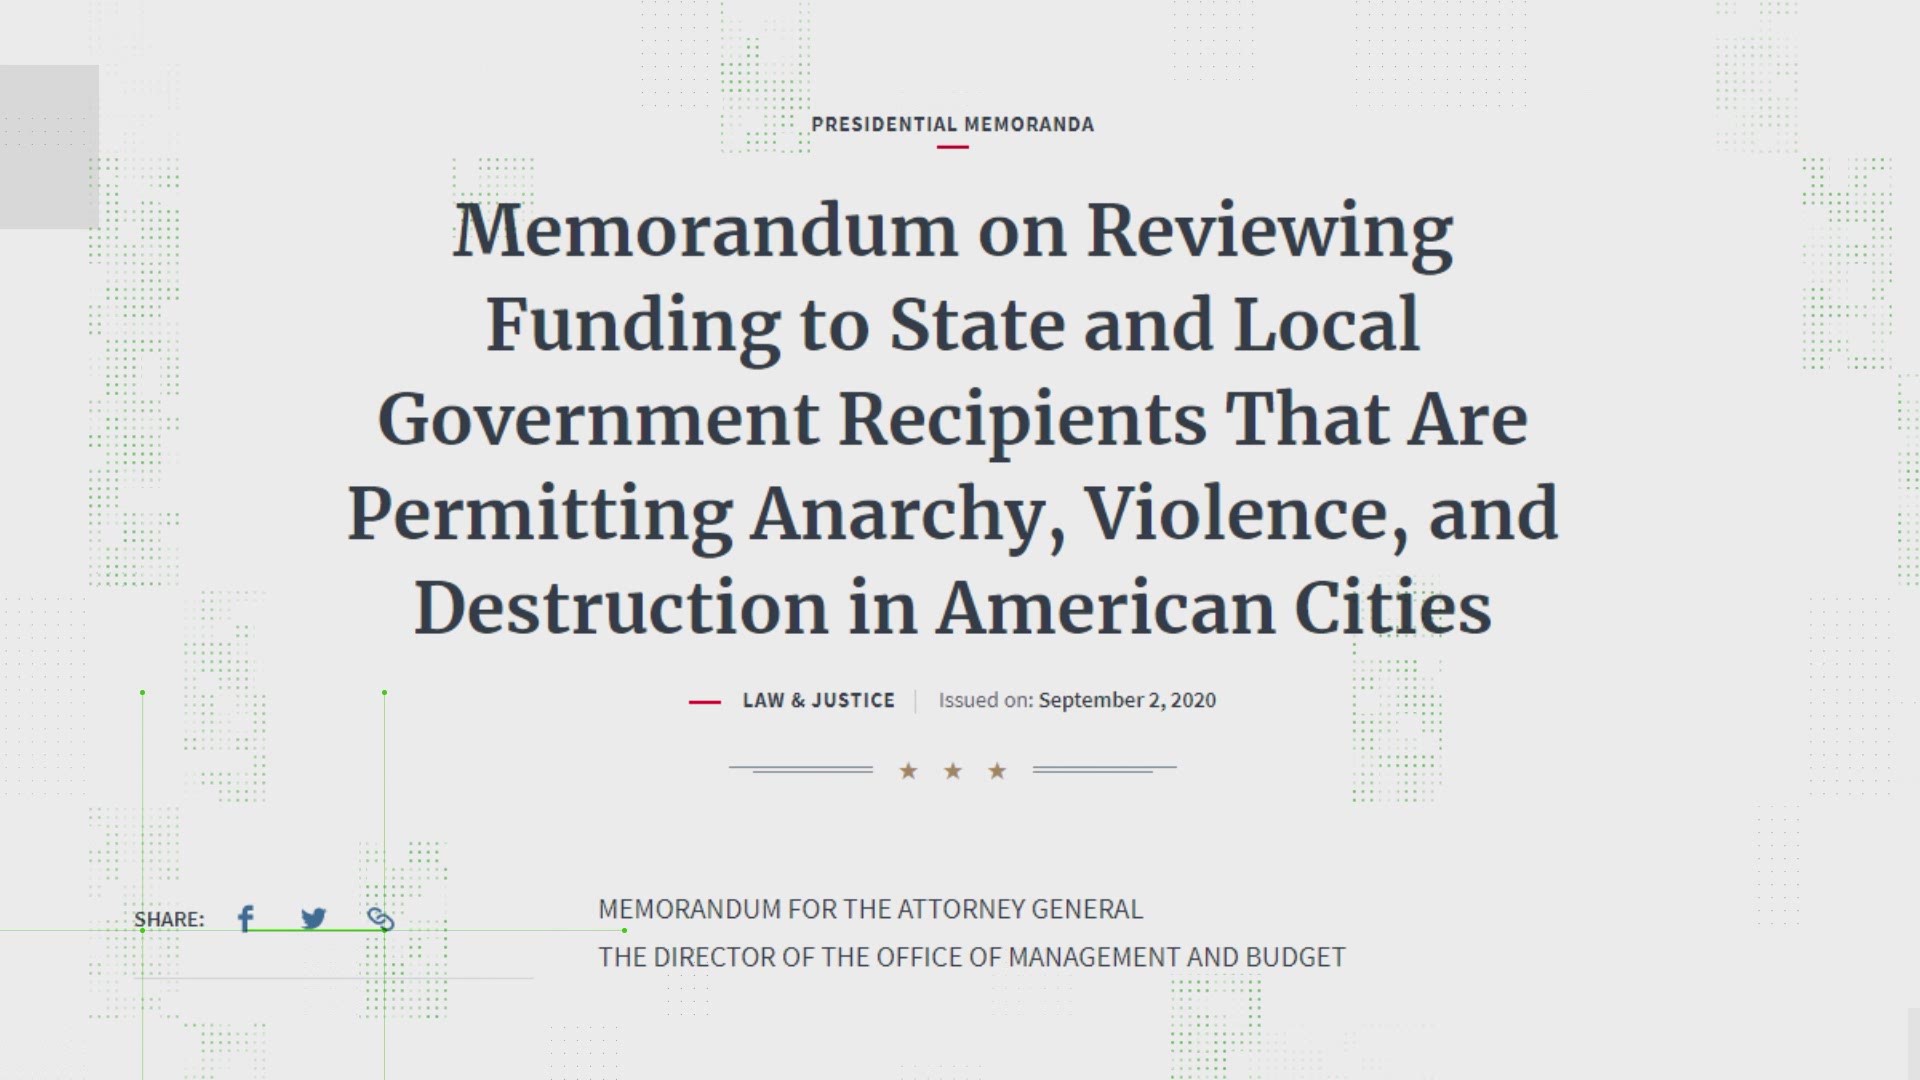 A new memo from the President calls for federal funding to be withheld from Portland, Seattle and other cities that they call "anarchist jurisdictions"